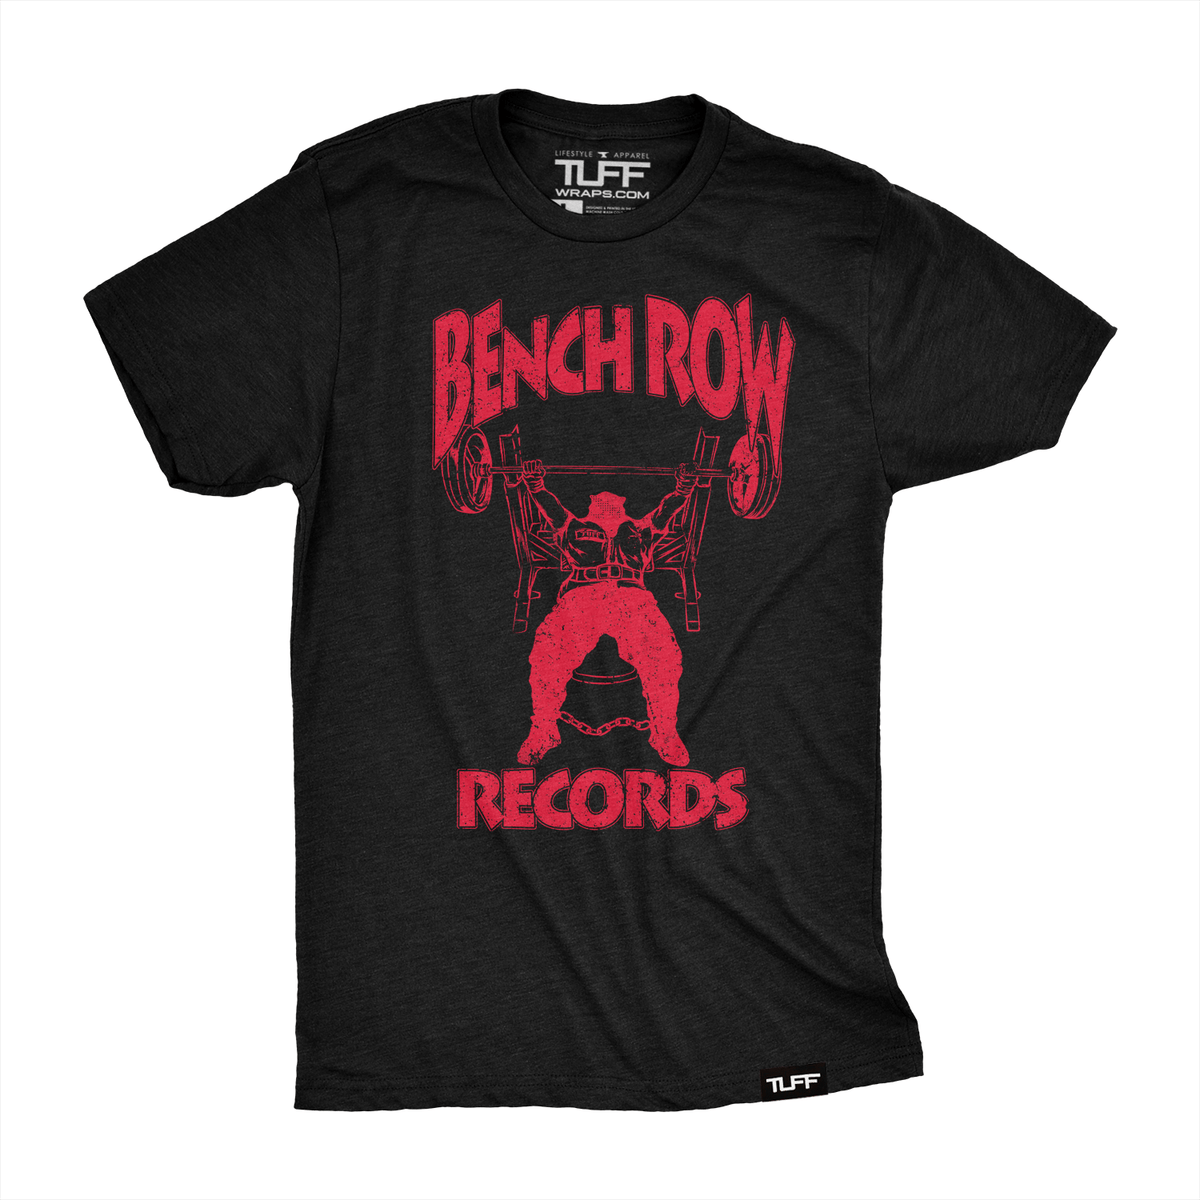 Bench Row Records Tee S / Black with Red TuffWraps.com